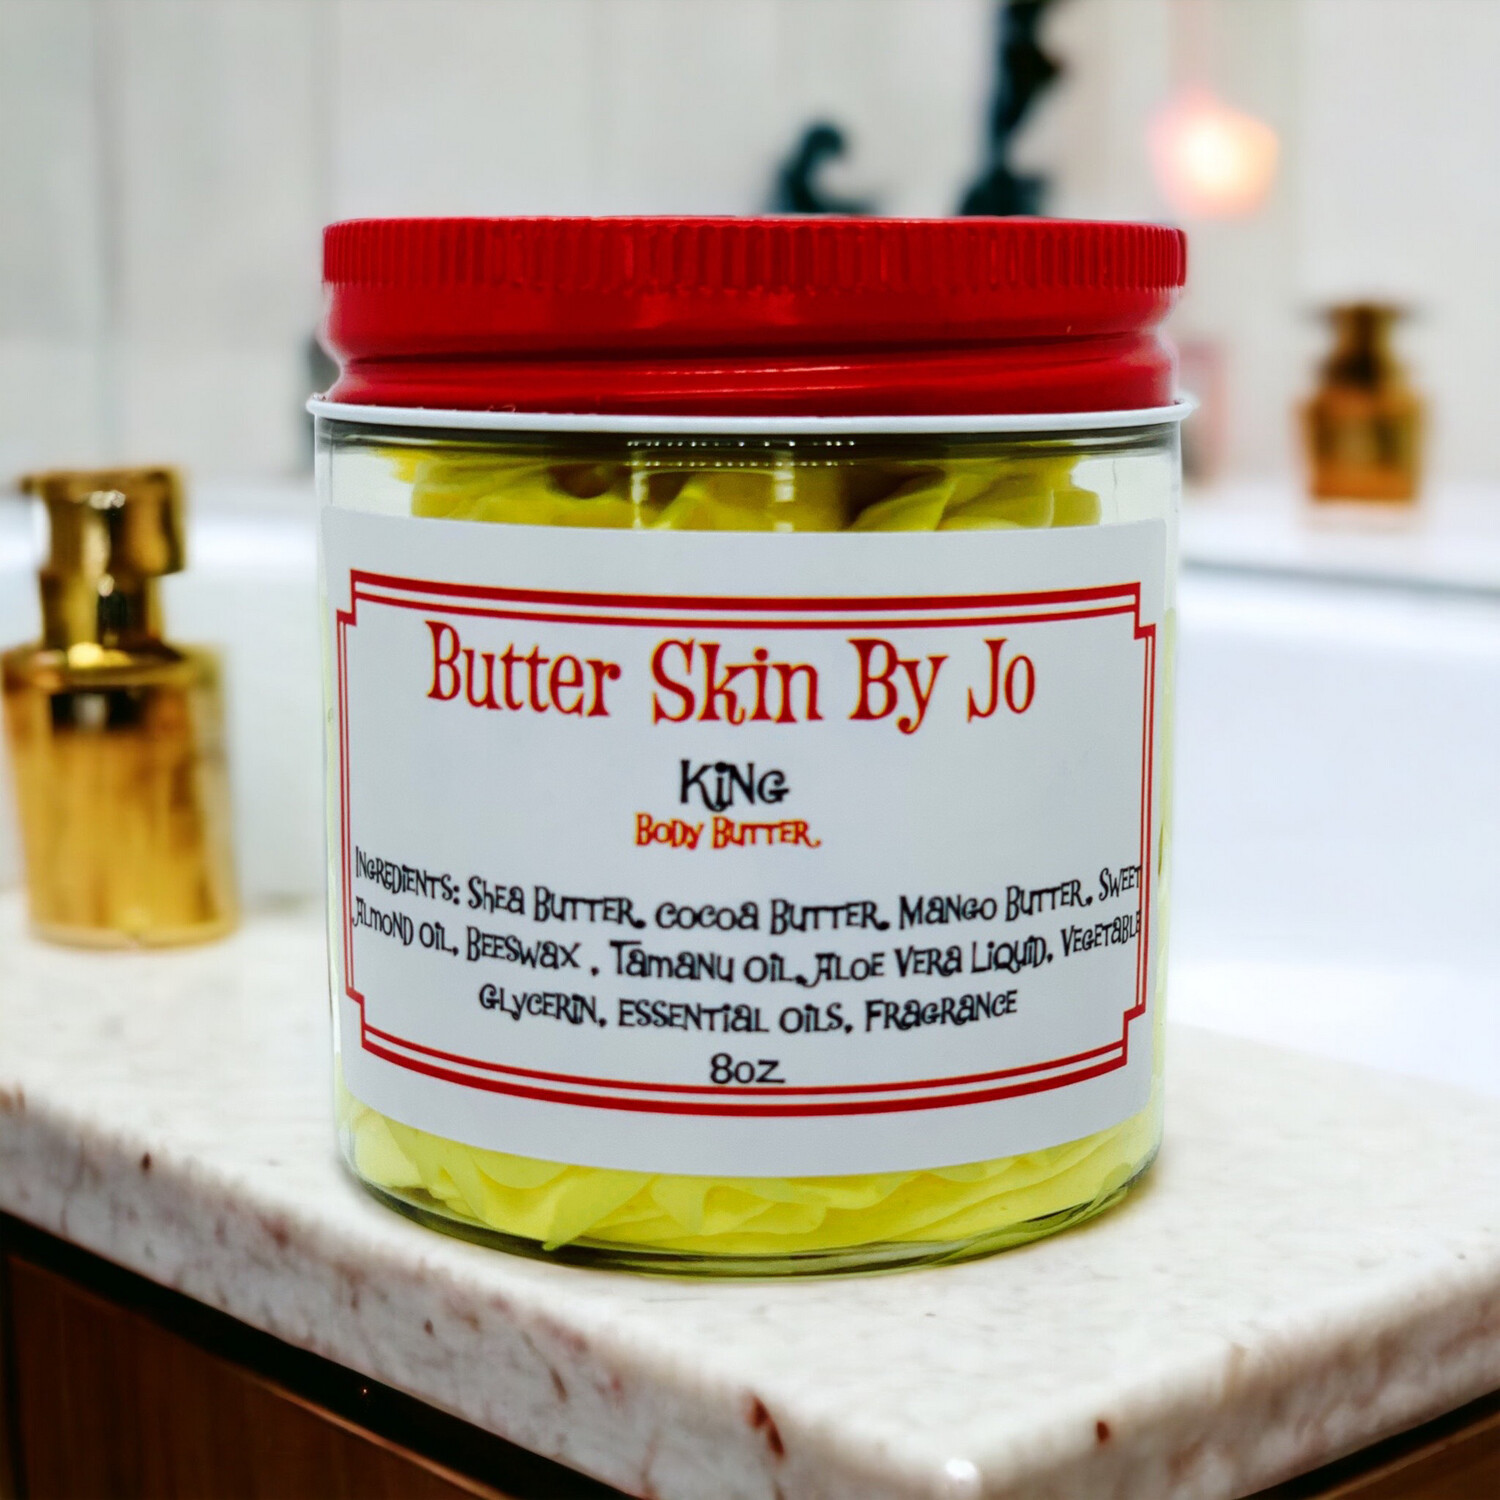 King Body Butter Subscription